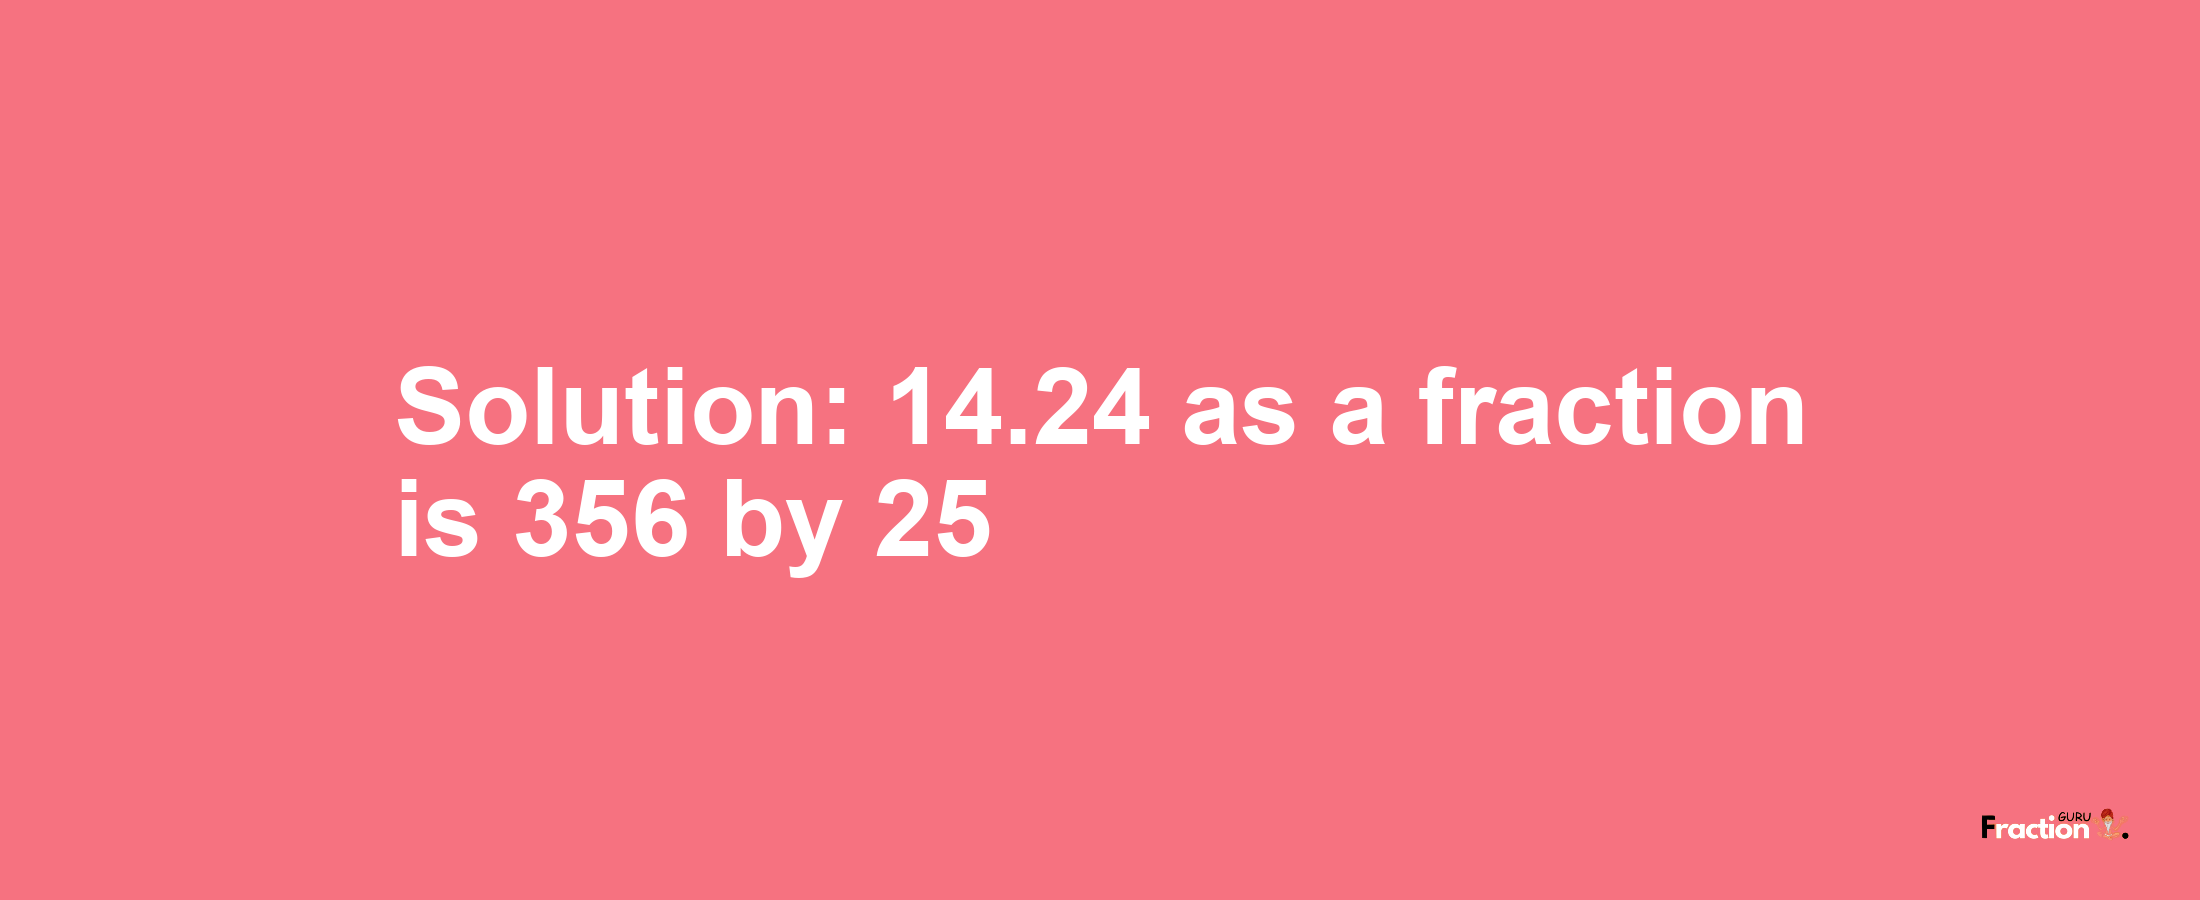 Solution:14.24 as a fraction is 356/25